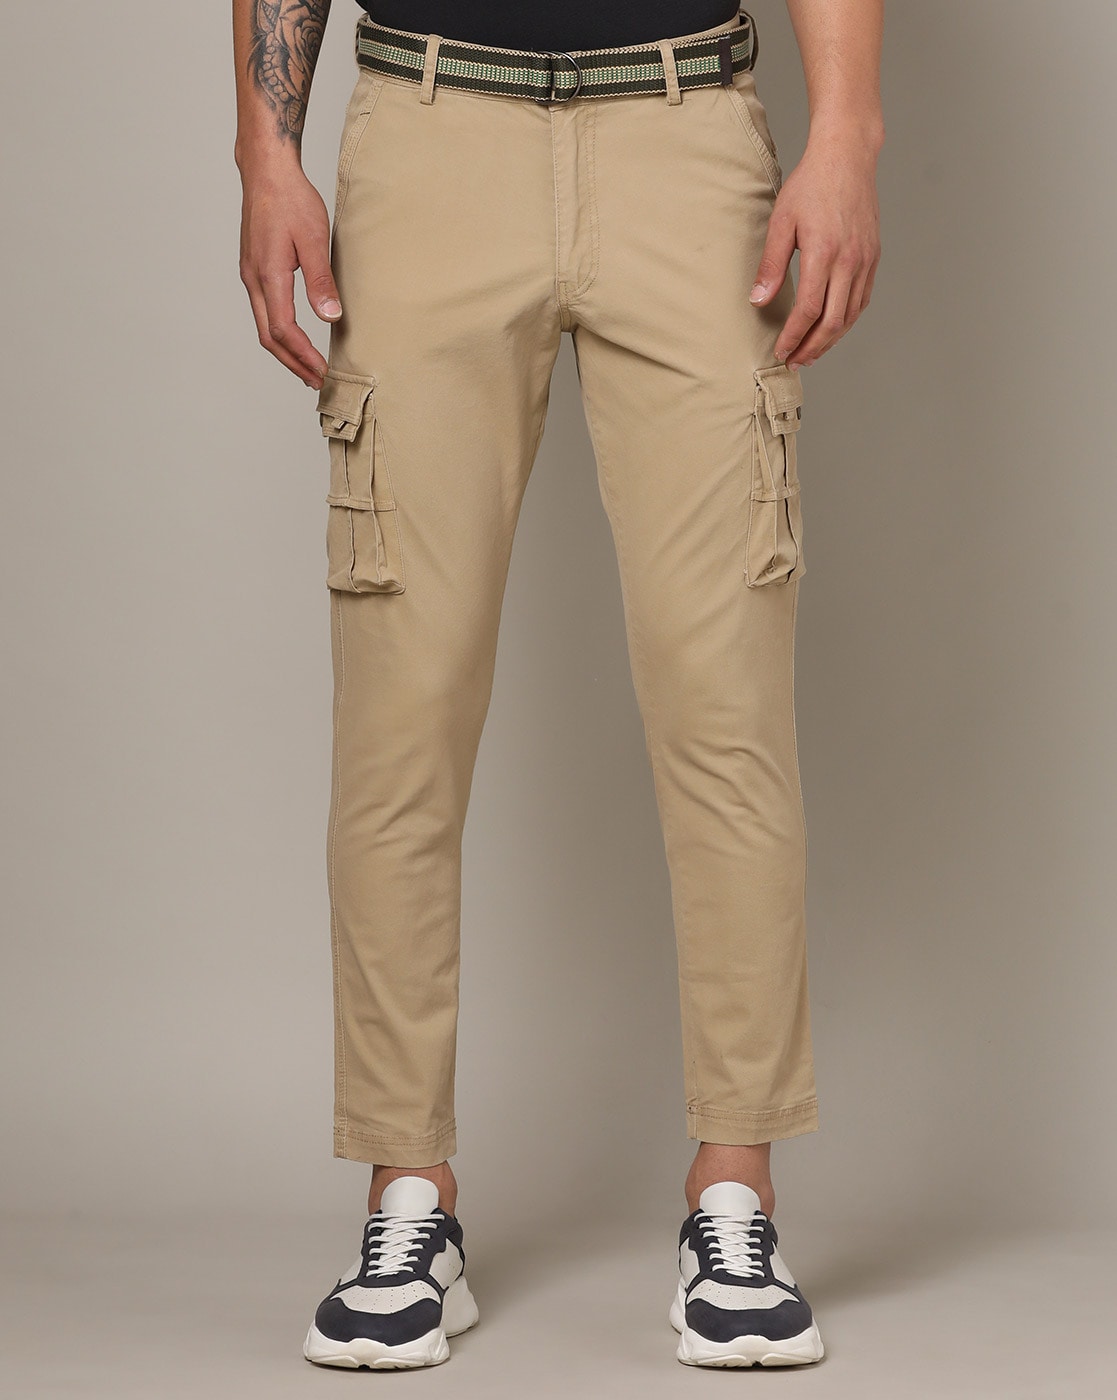 BDG Sand Linen Multi-Pocket Cargo Pant | Urban Outfitters